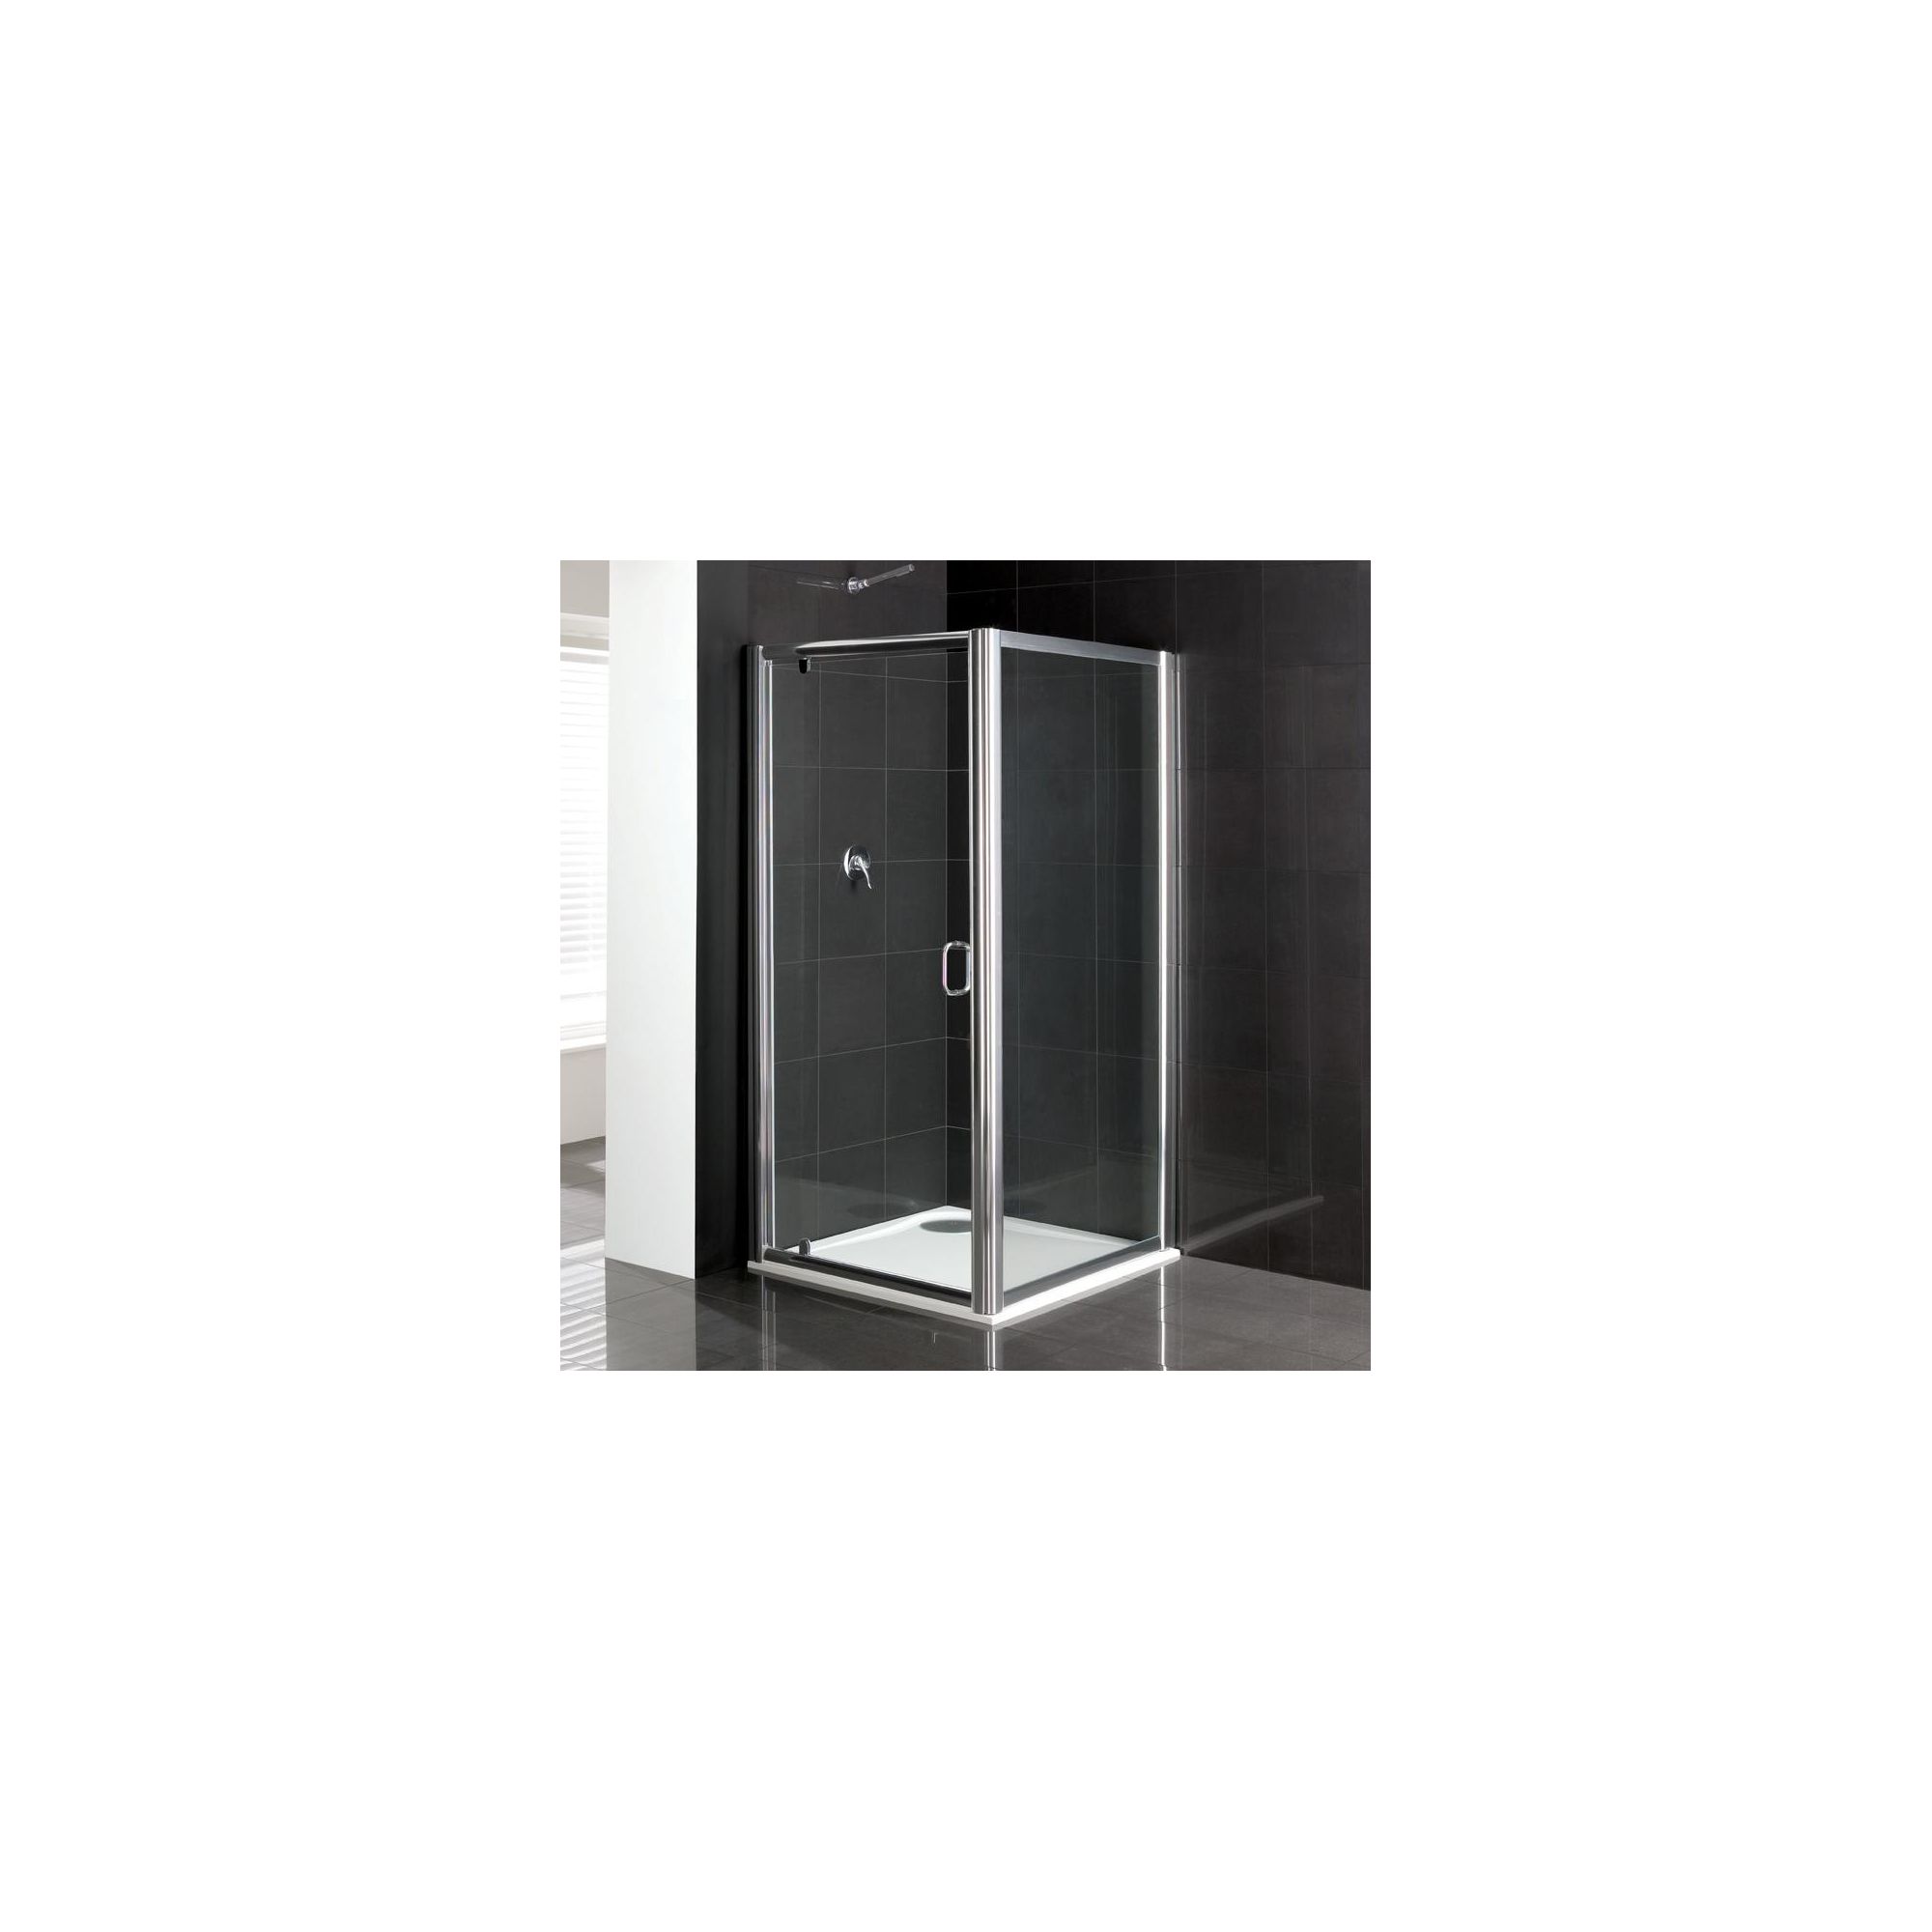 Duchy Elite Silver Pivot Door Shower Enclosure with Towel Rail, 800mm x 800mm, Standard Tray, 6mm Glass at Tescos Direct